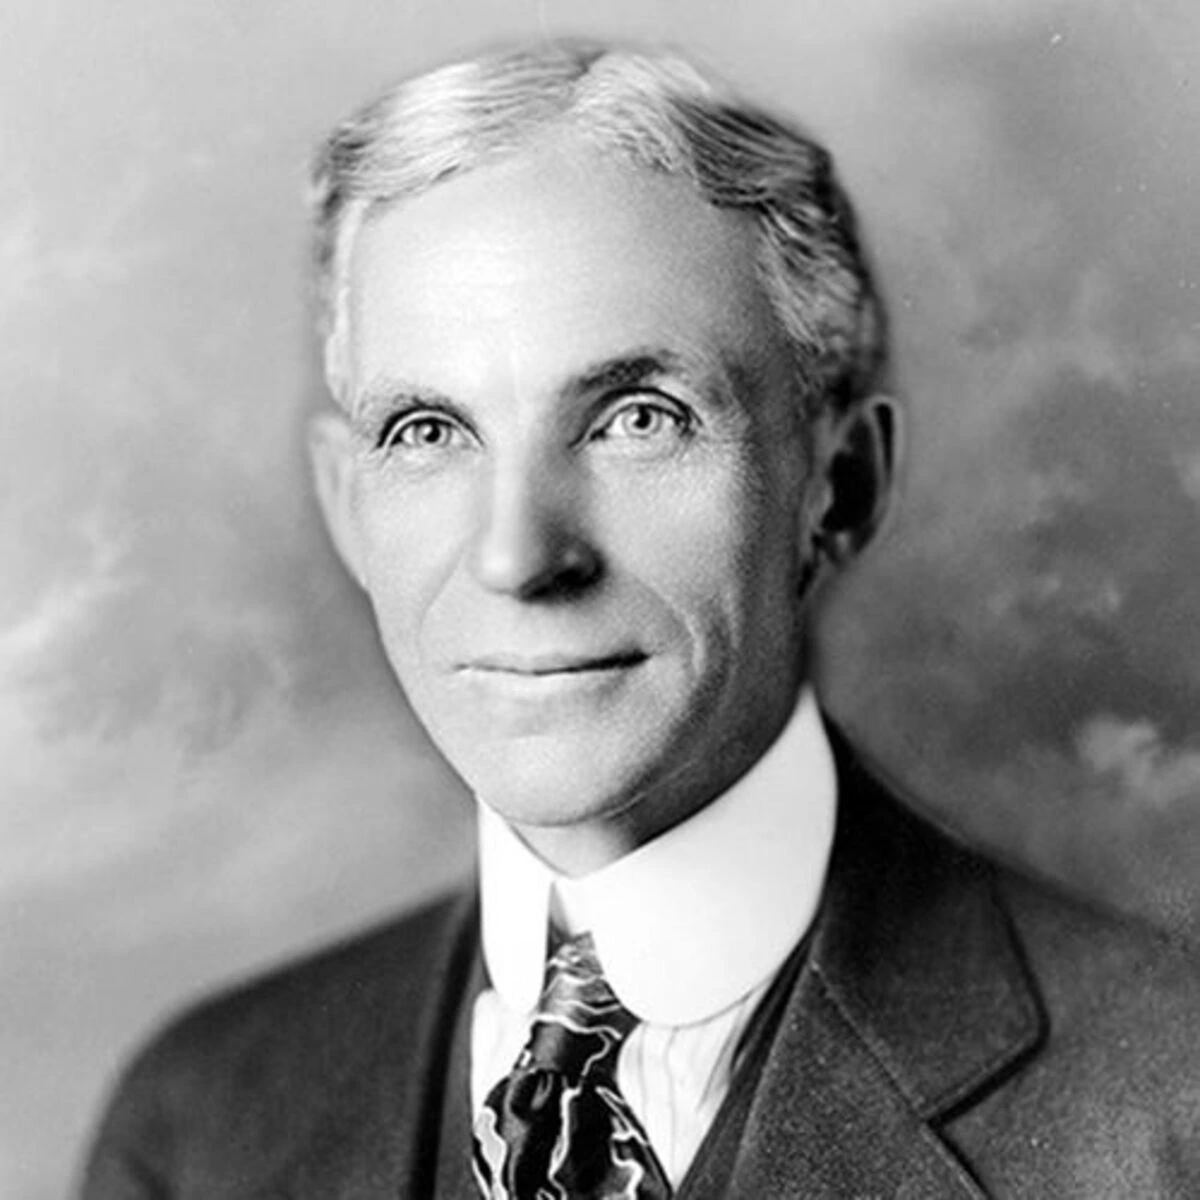 Henry Ford 1